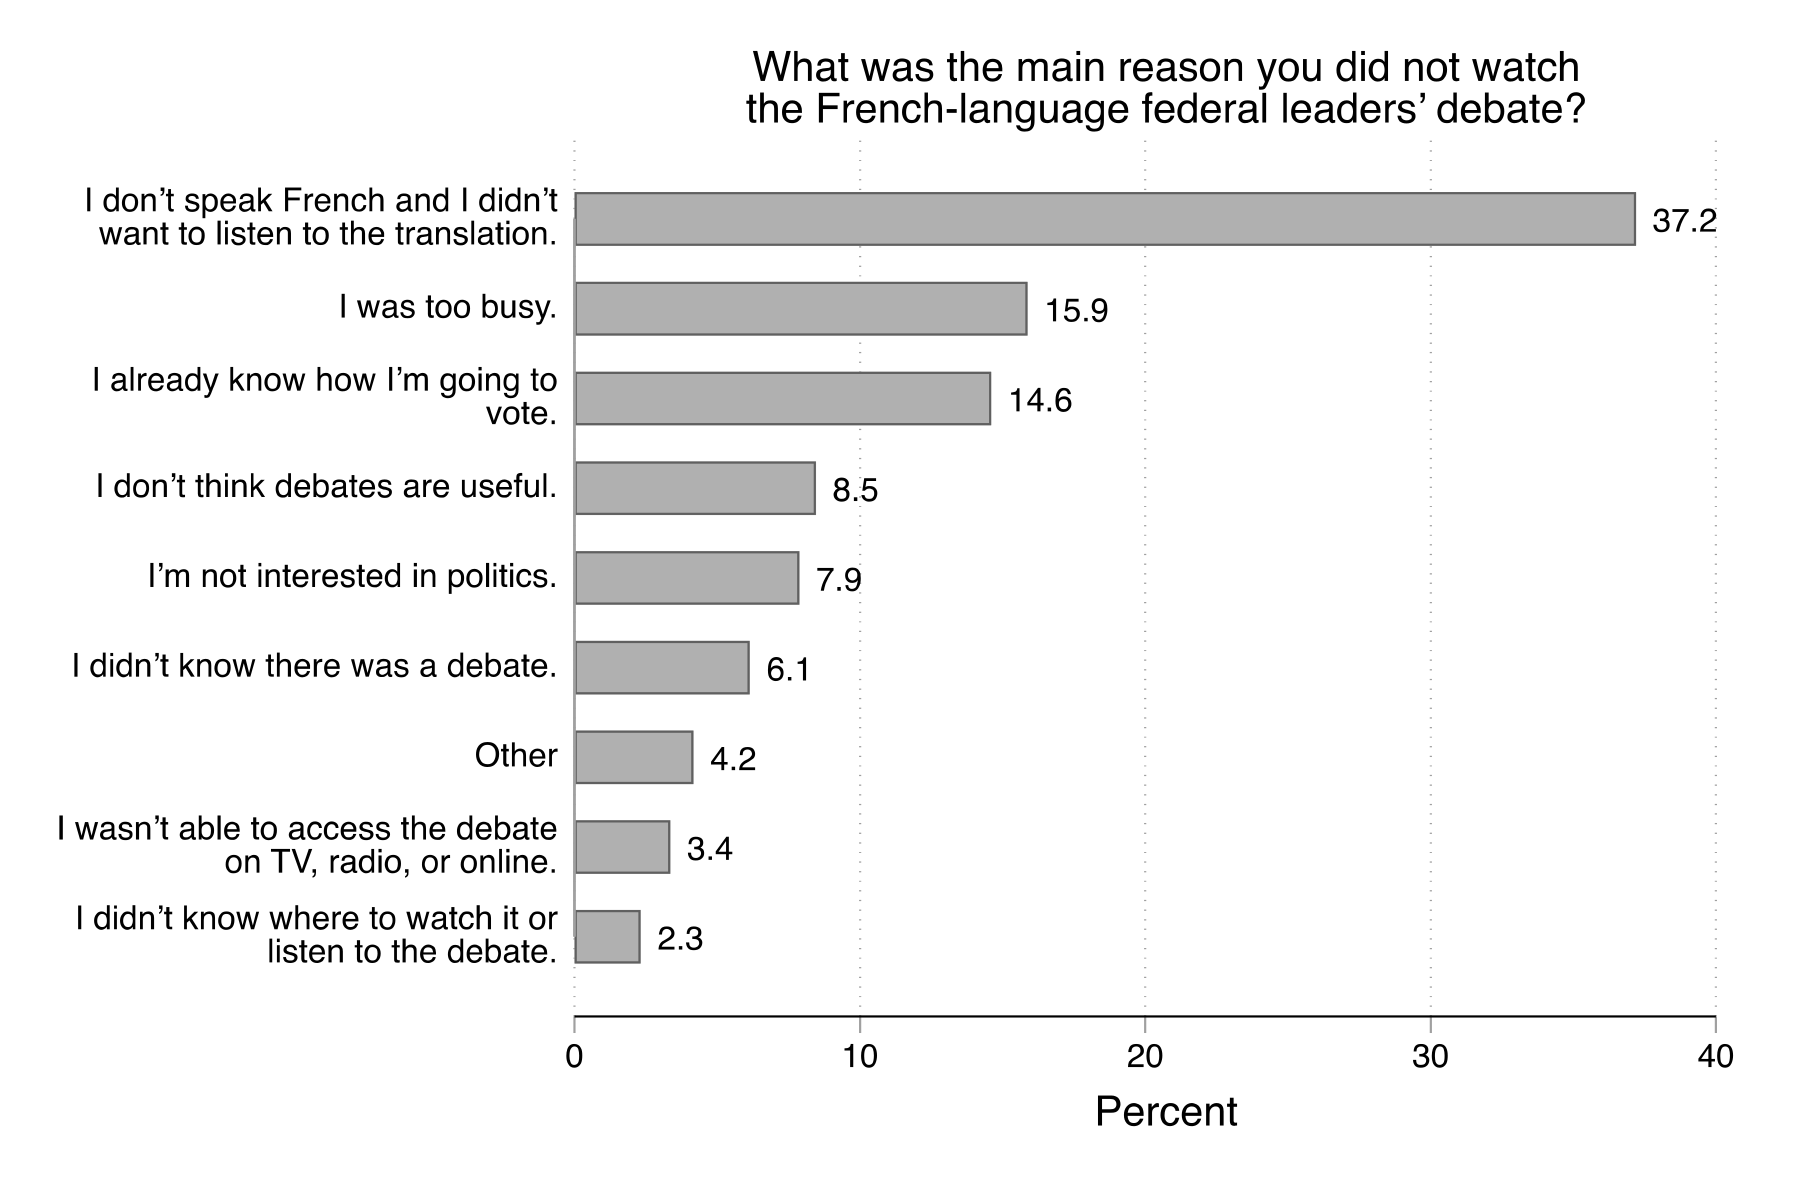 Figure 11. This figure shows the main reasons given by those who did not watch the French debate.  The most common reason given (37%) was that the participant did not speak French and did not want to listen to the translation. Other common reasons given were: I was too busy (16%) and I already know how I'm going to vote (15%).